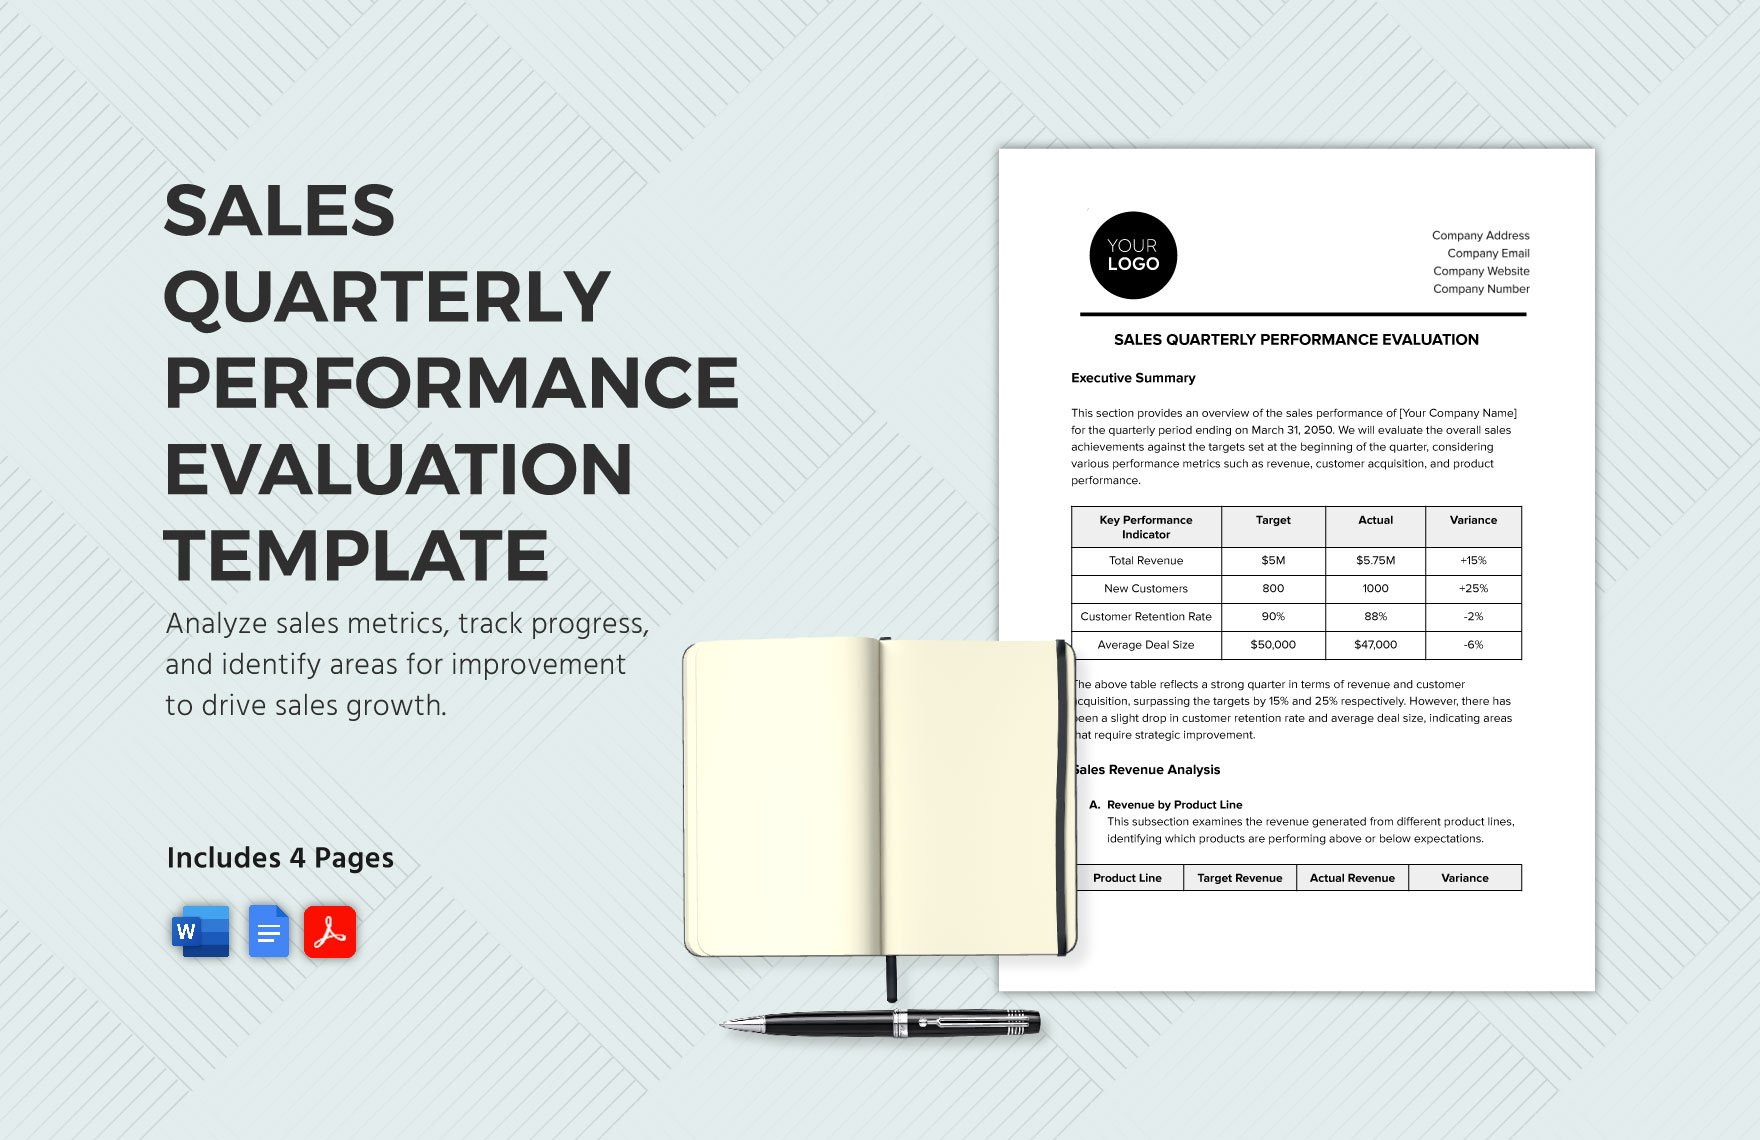 Sales Quarterly Performance Evaluation Template in Word, Google Docs, PDF